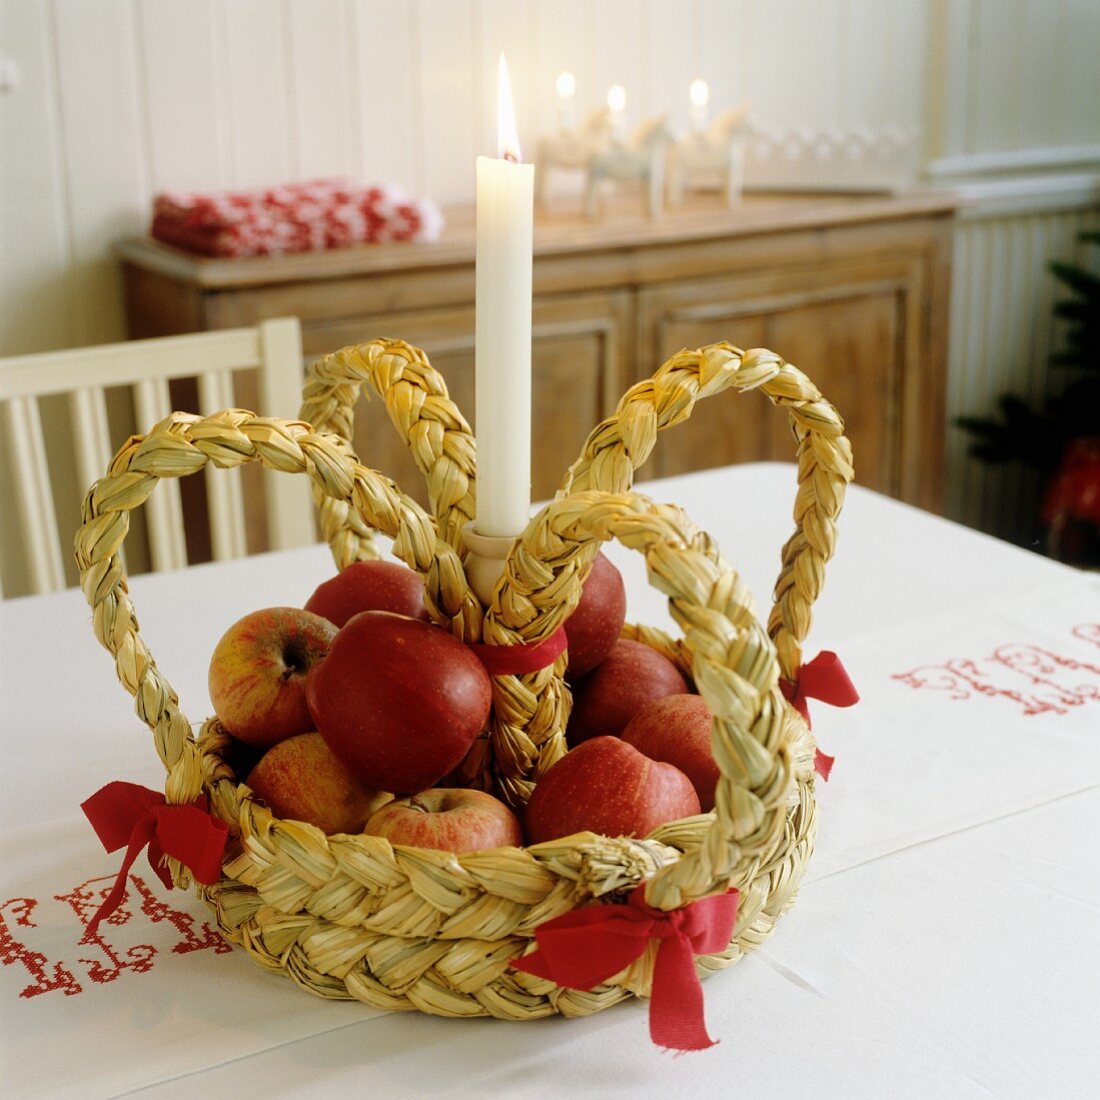 Crown woven from straw holding apples and a single candle